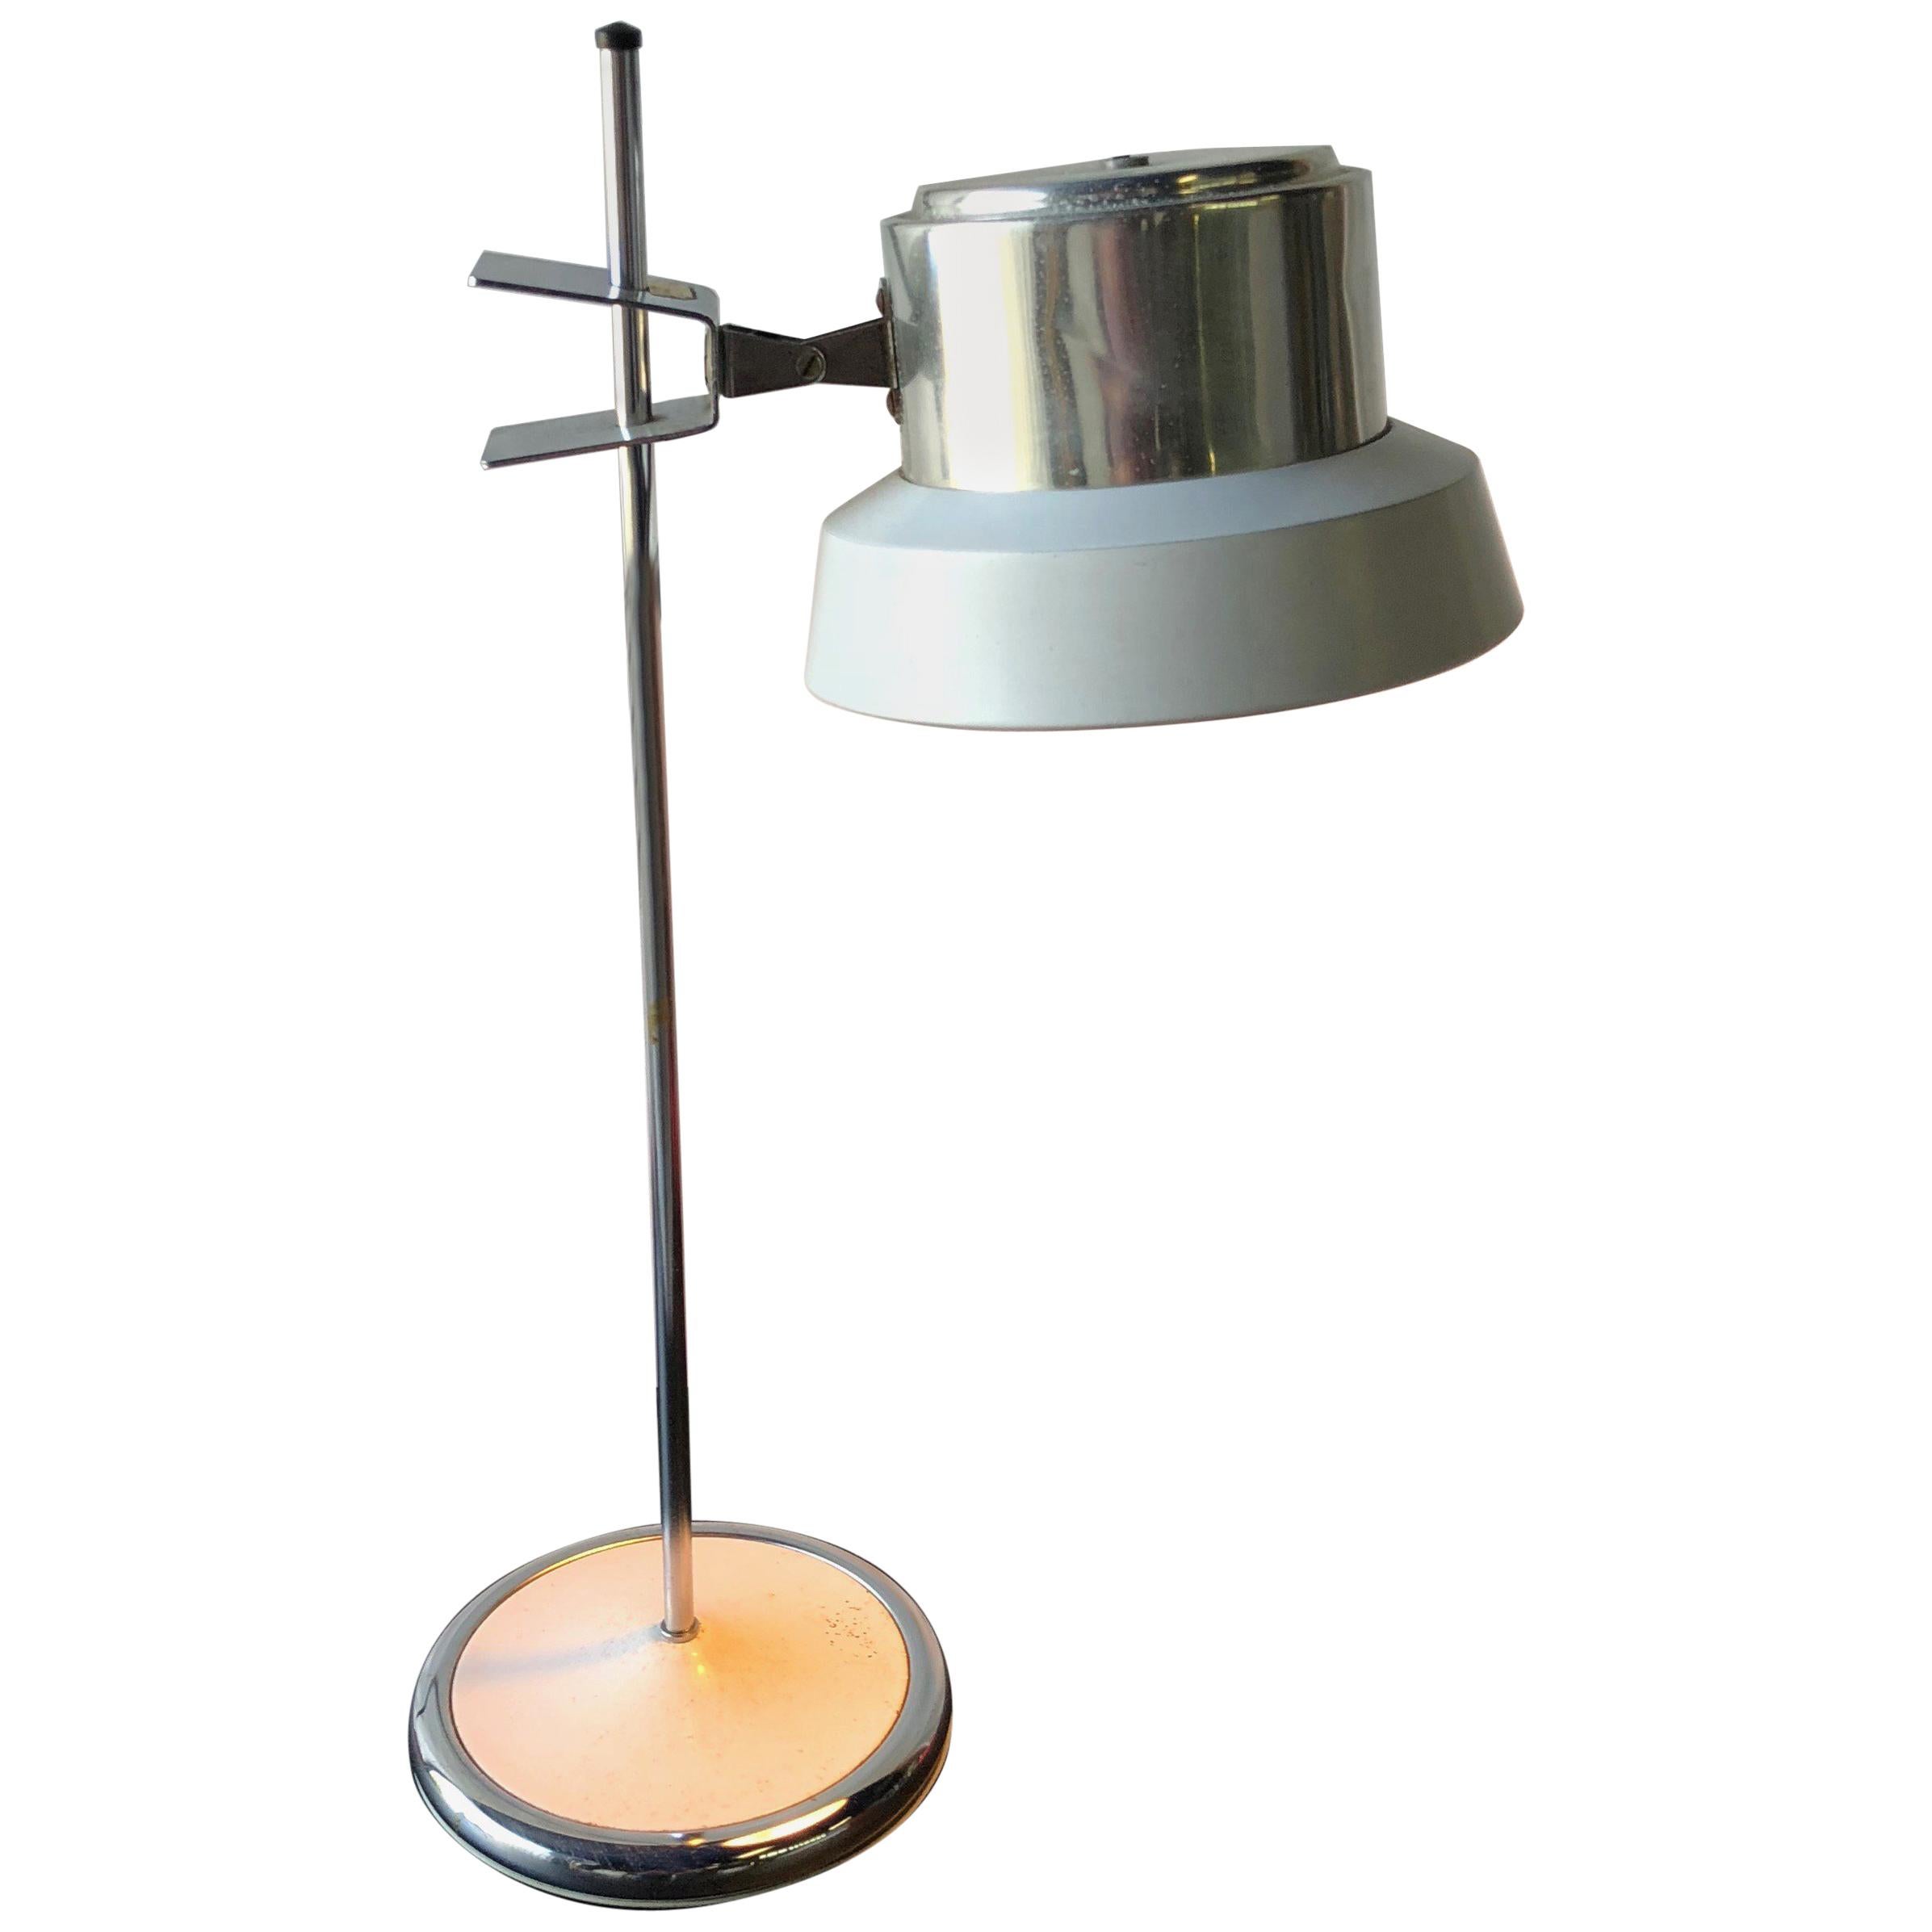 Adjustable Table Desk Lamp by Targetti Sankey Italy, circa 1970